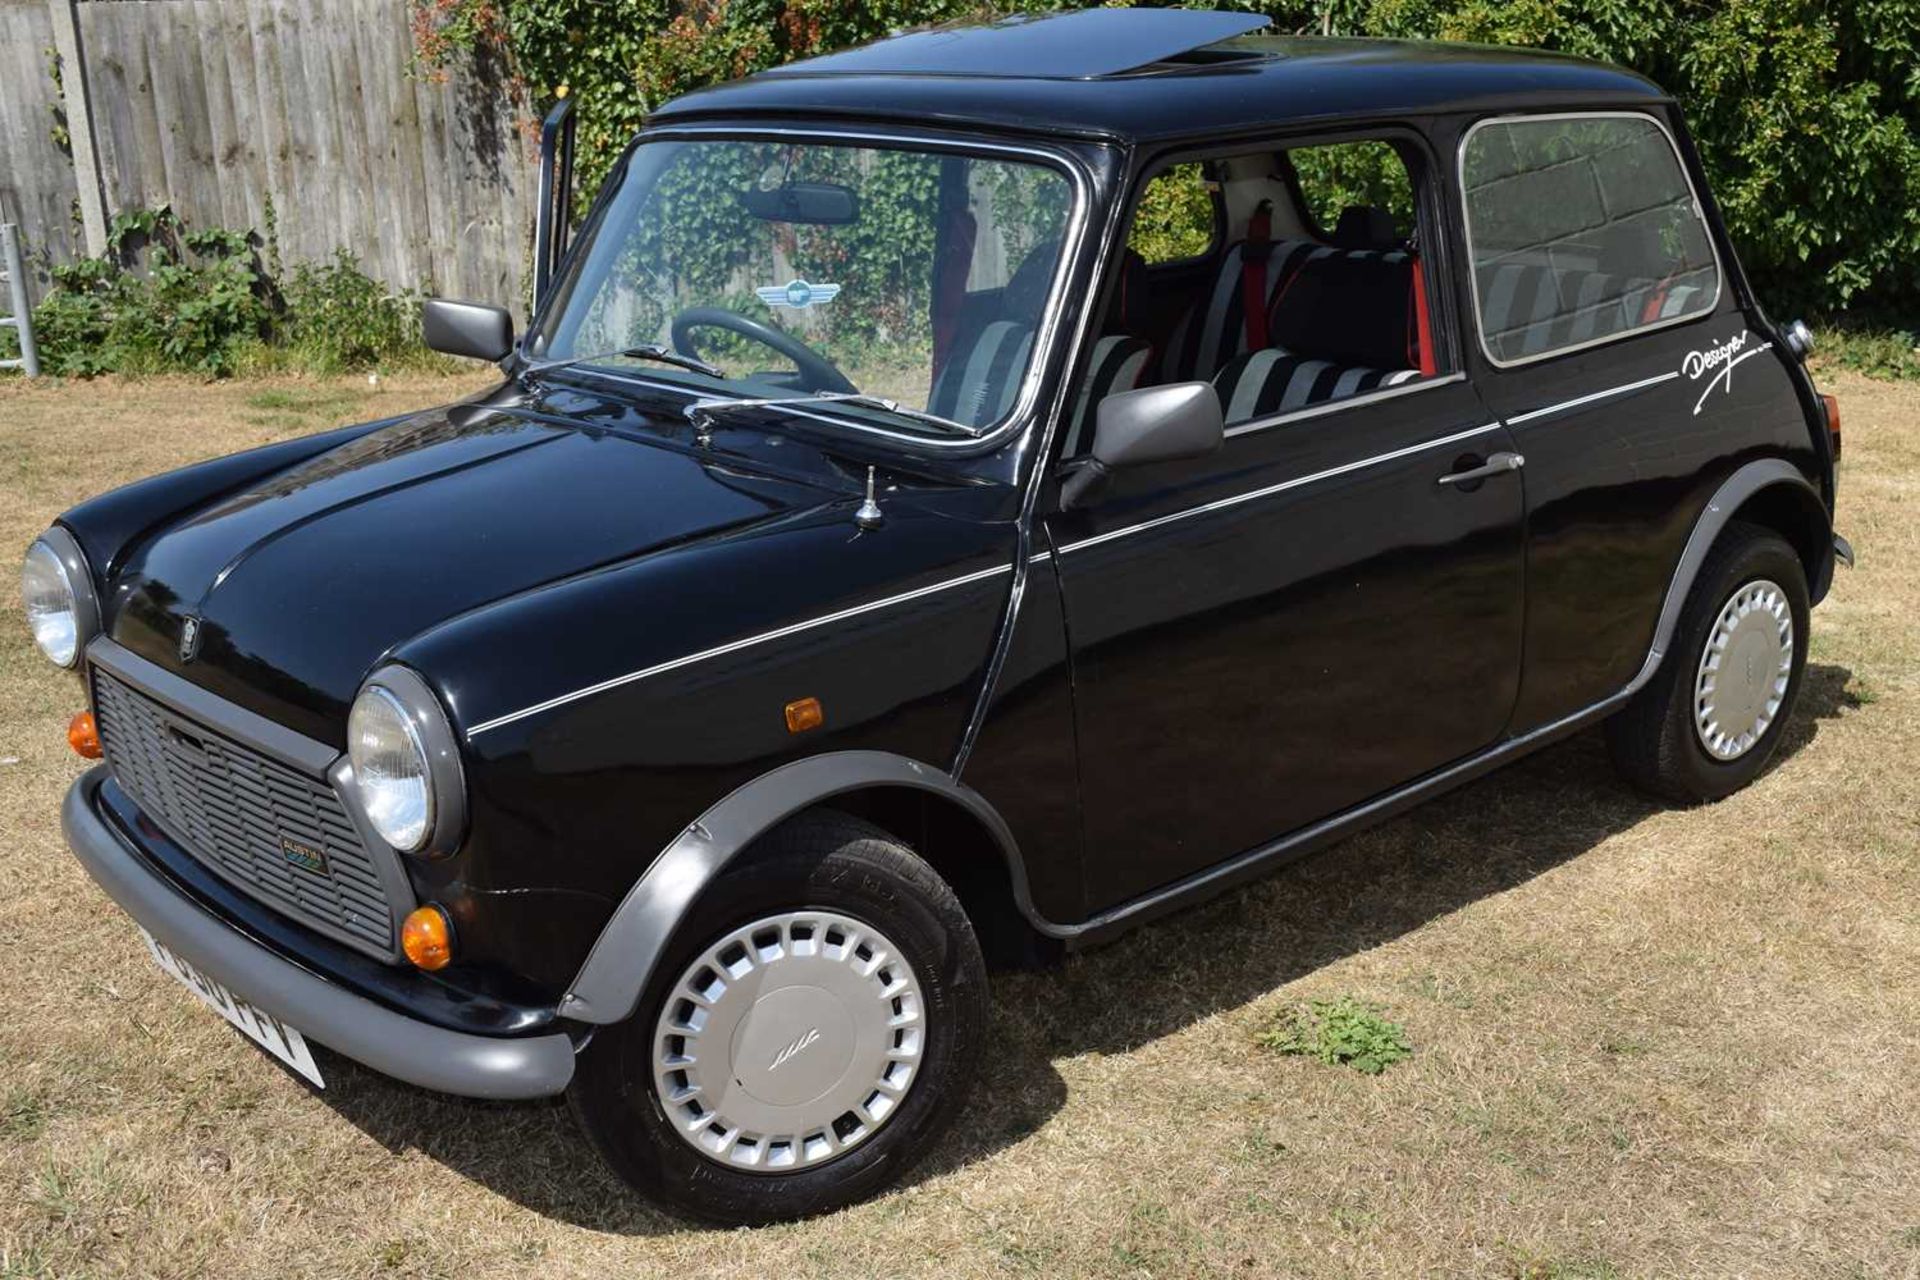 1988 Austin Mini Designer Mary Quant in Black. The Mini needs no introduction. One of the most - Image 8 of 10